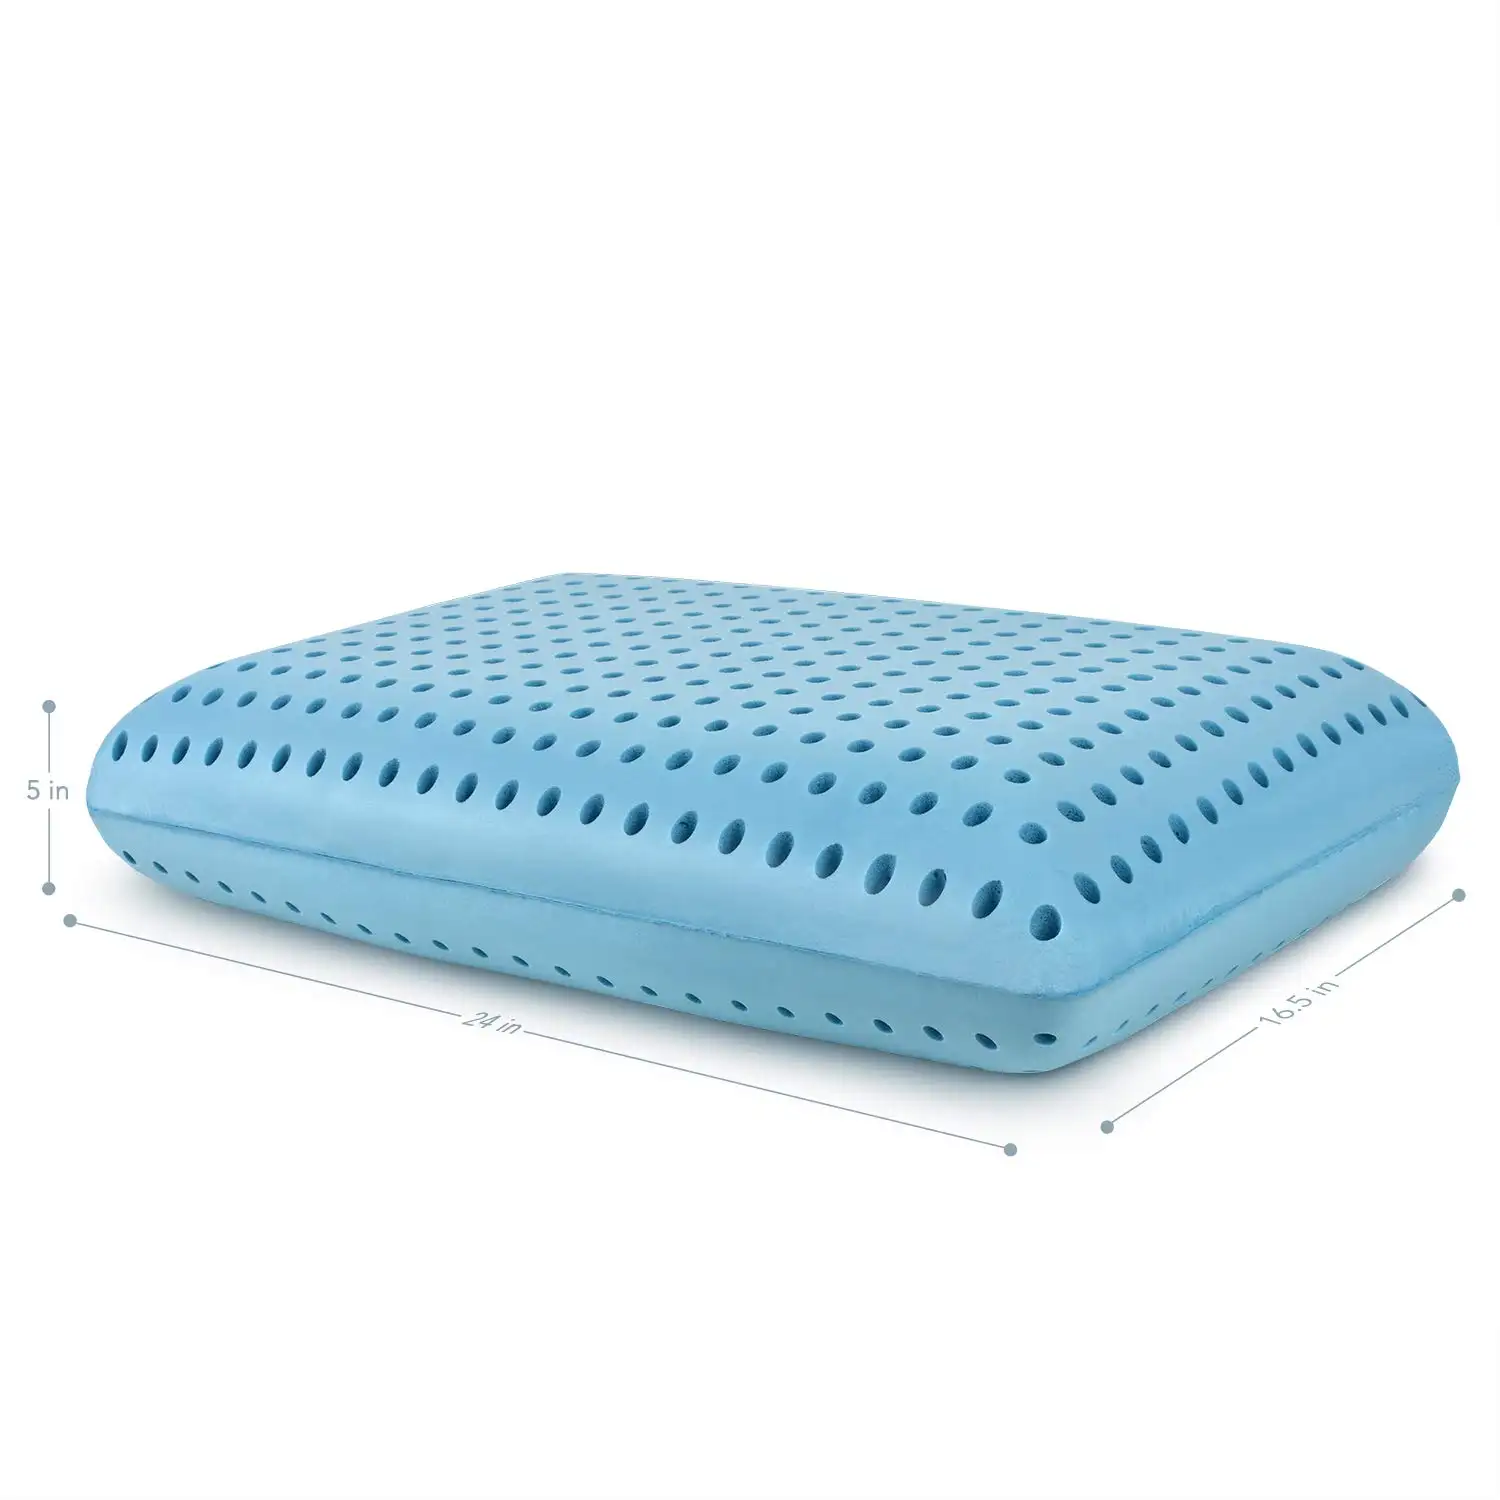 Cooling Memory Foam Pillows for Side Sleepers with Neck and Shoulder Pain Ventilated Gel Pillows for Sleeping